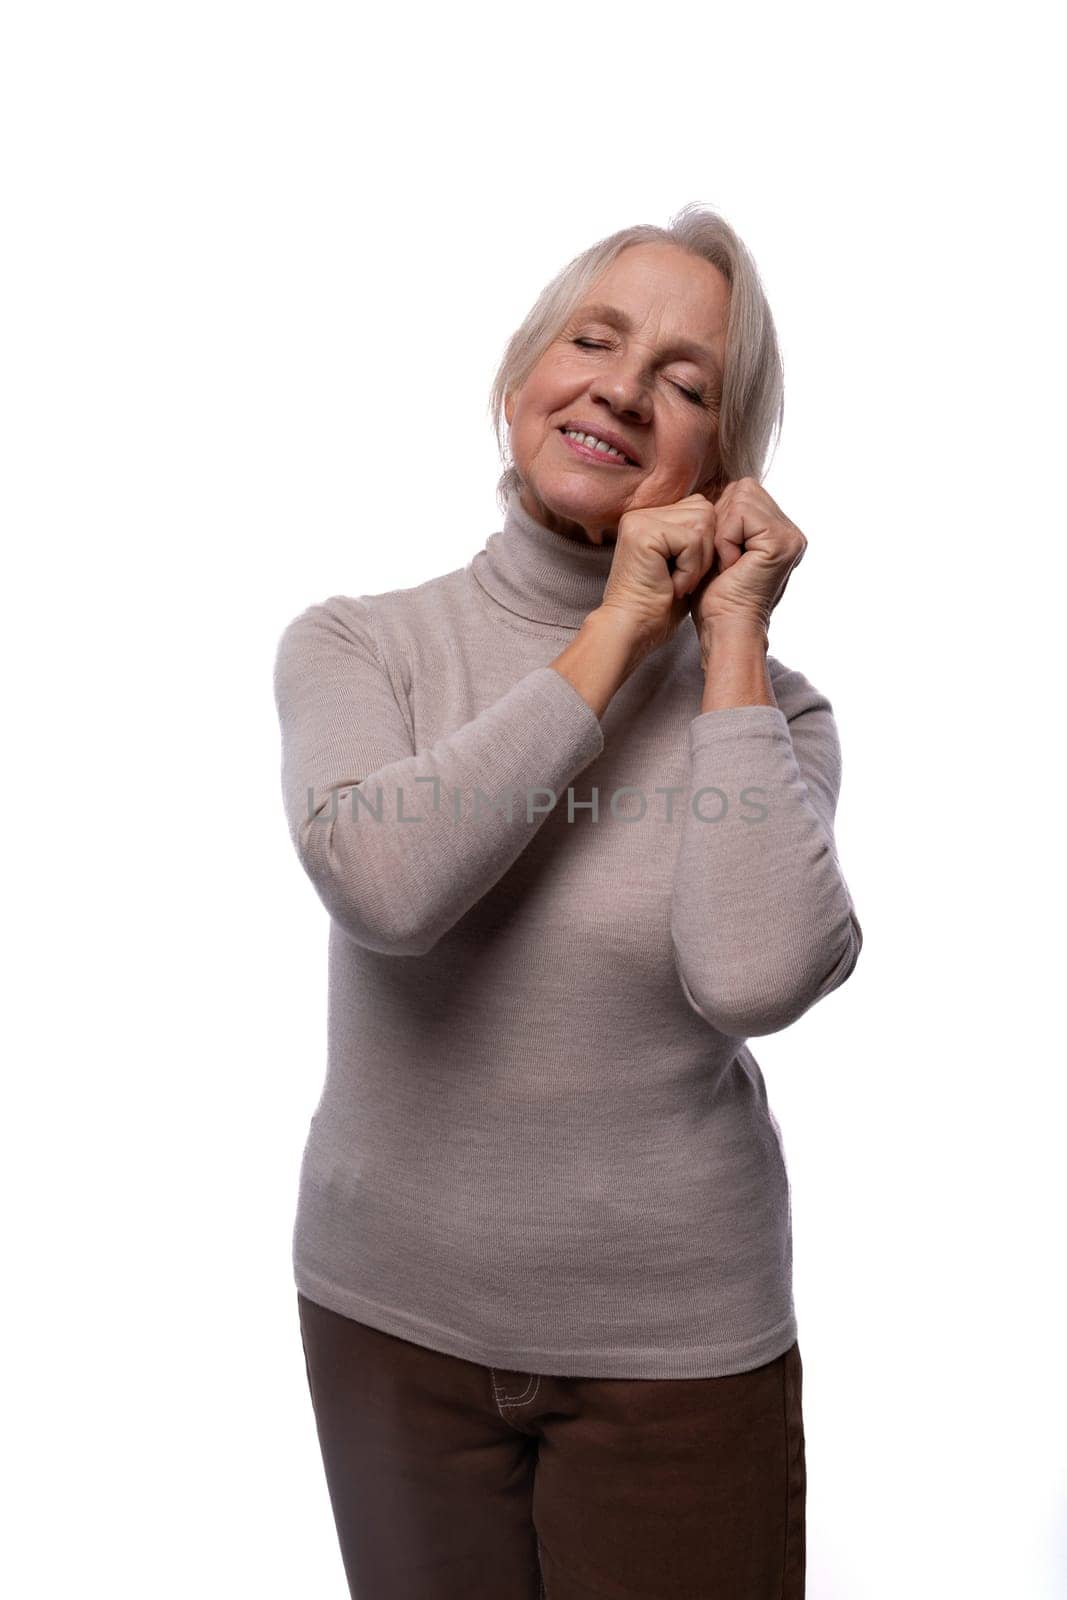 Elderly kind woman with gray hair on a white background by TRMK